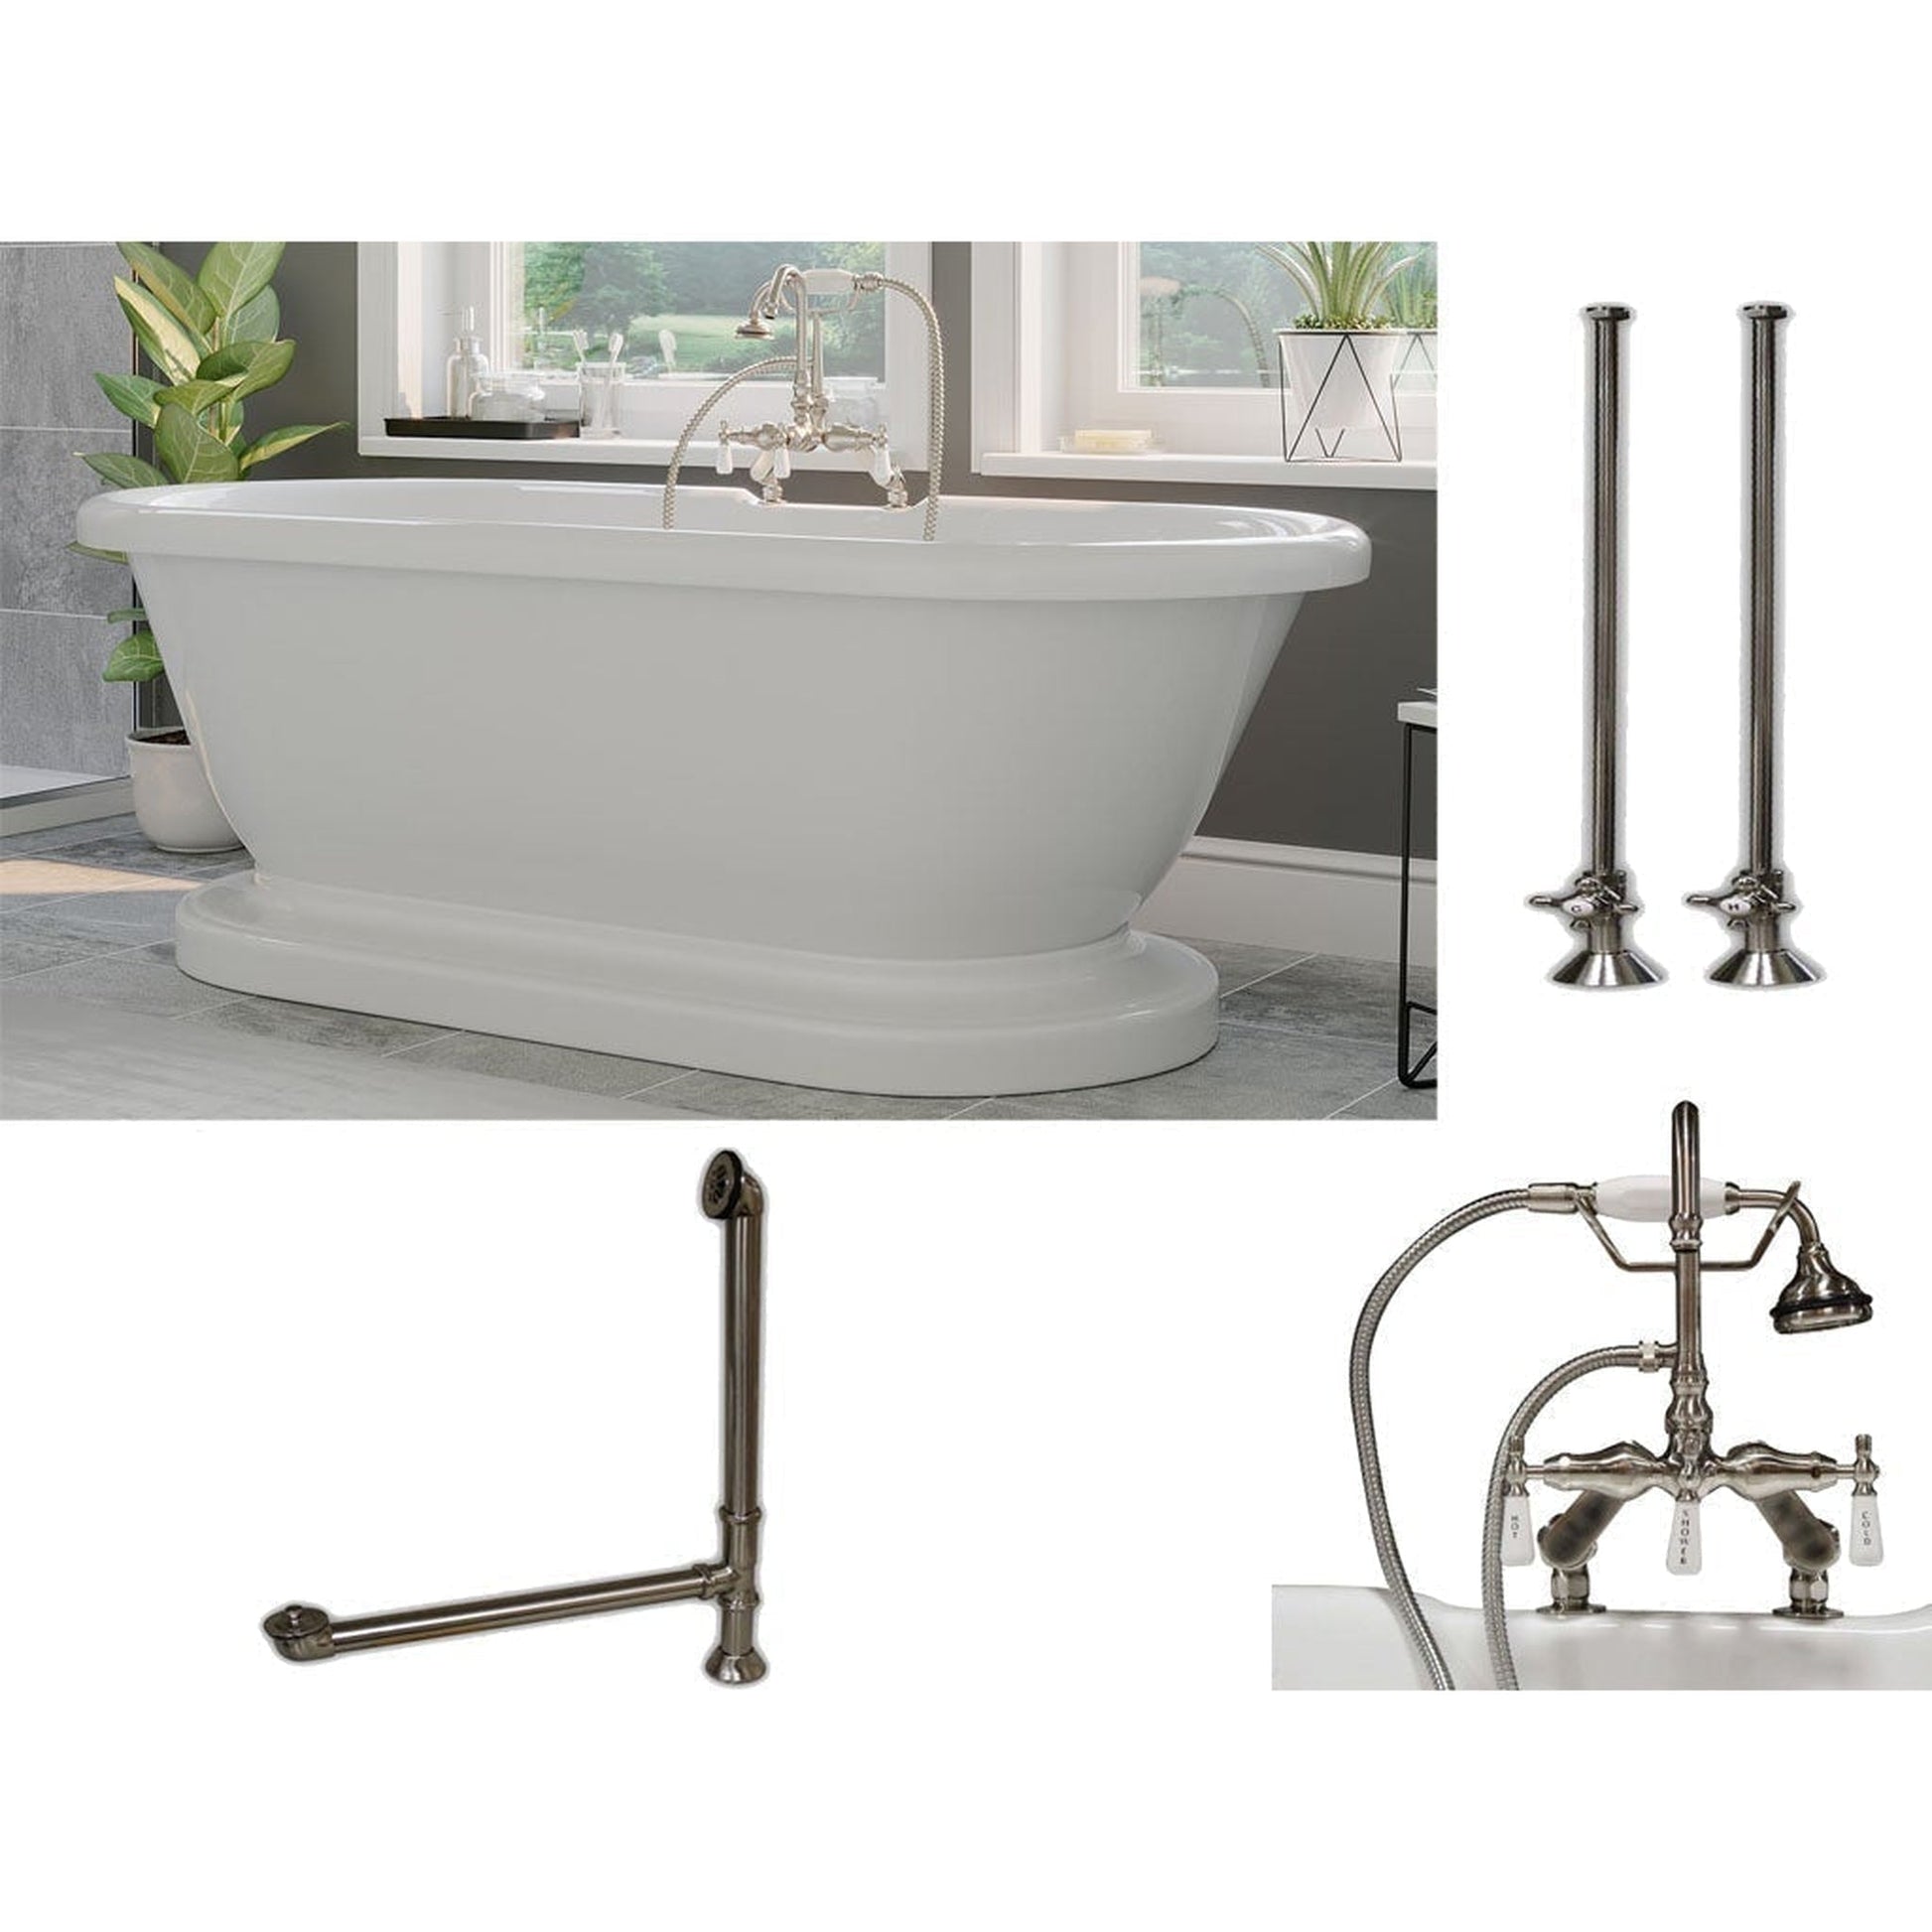 Cambridge Plumbing 70" White Acrylic Double Ended Pedestal Bathtub With Deck Holes And Complete Plumbing Package Including Porcelain Lever English Telephone Brass Faucet, Supply Lines, Drain And Overflow Assembly In Brushed Nickel